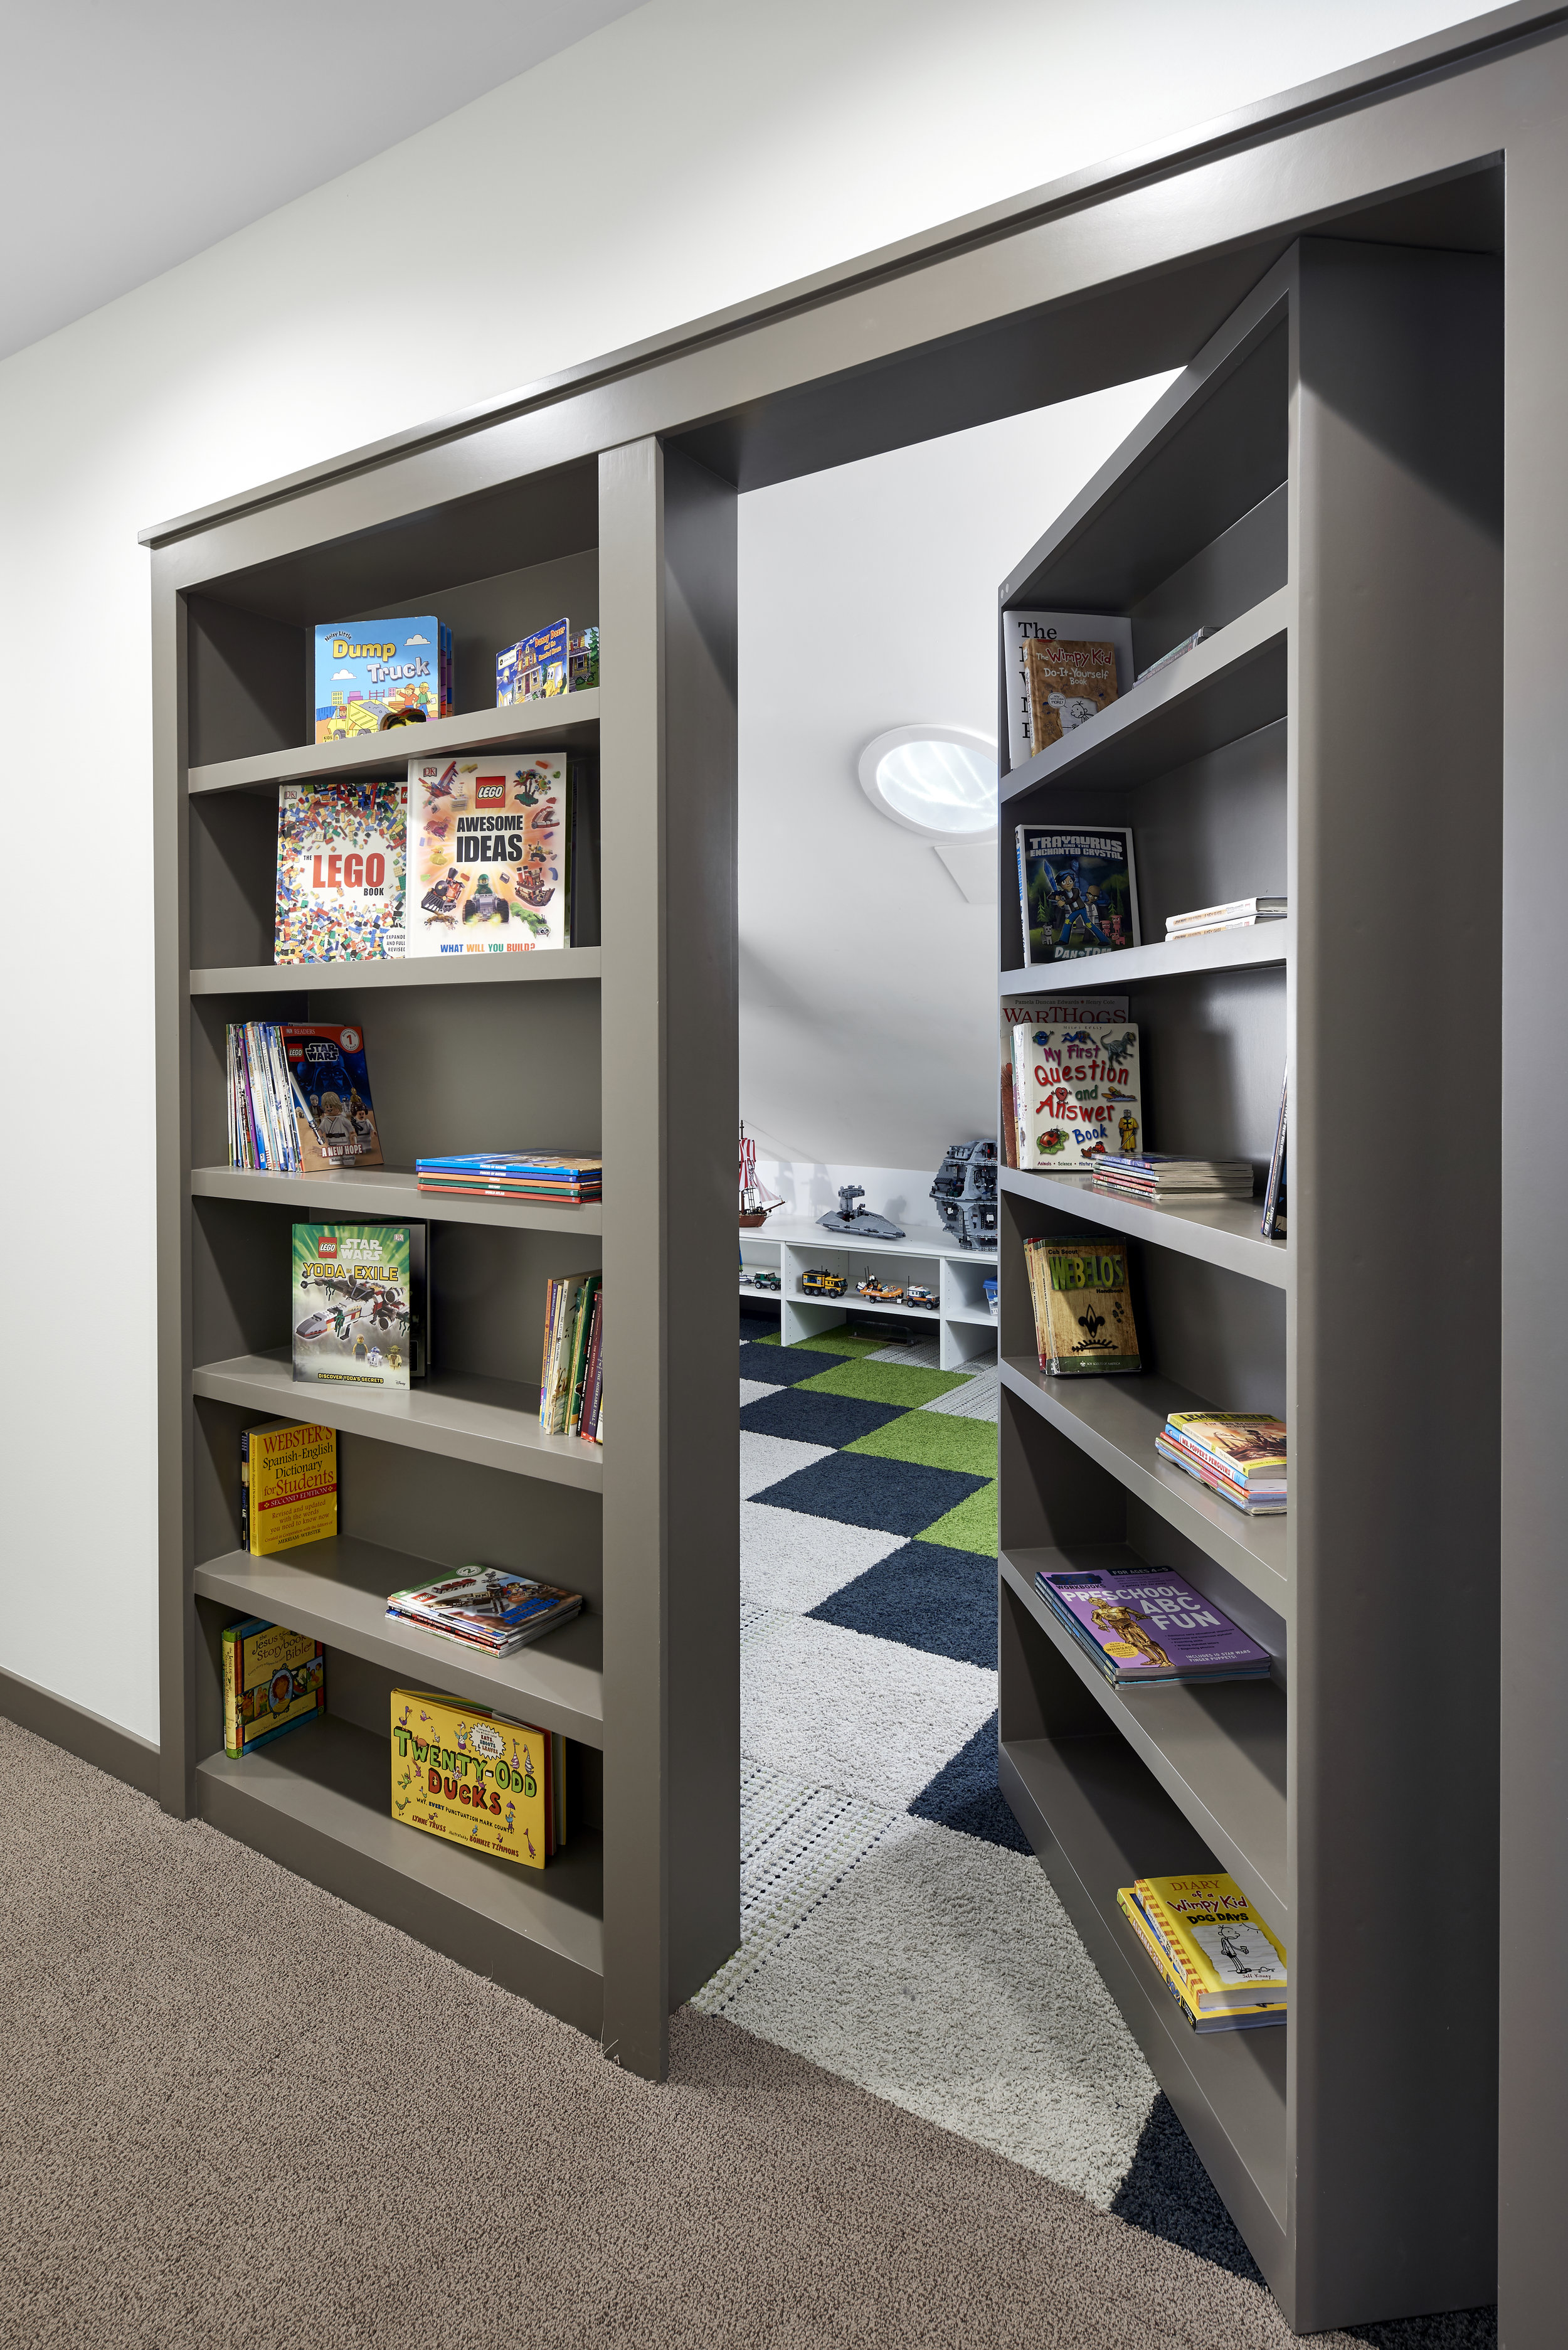 Toy room hidden behind bookcases, designed by NewStudio Architecture